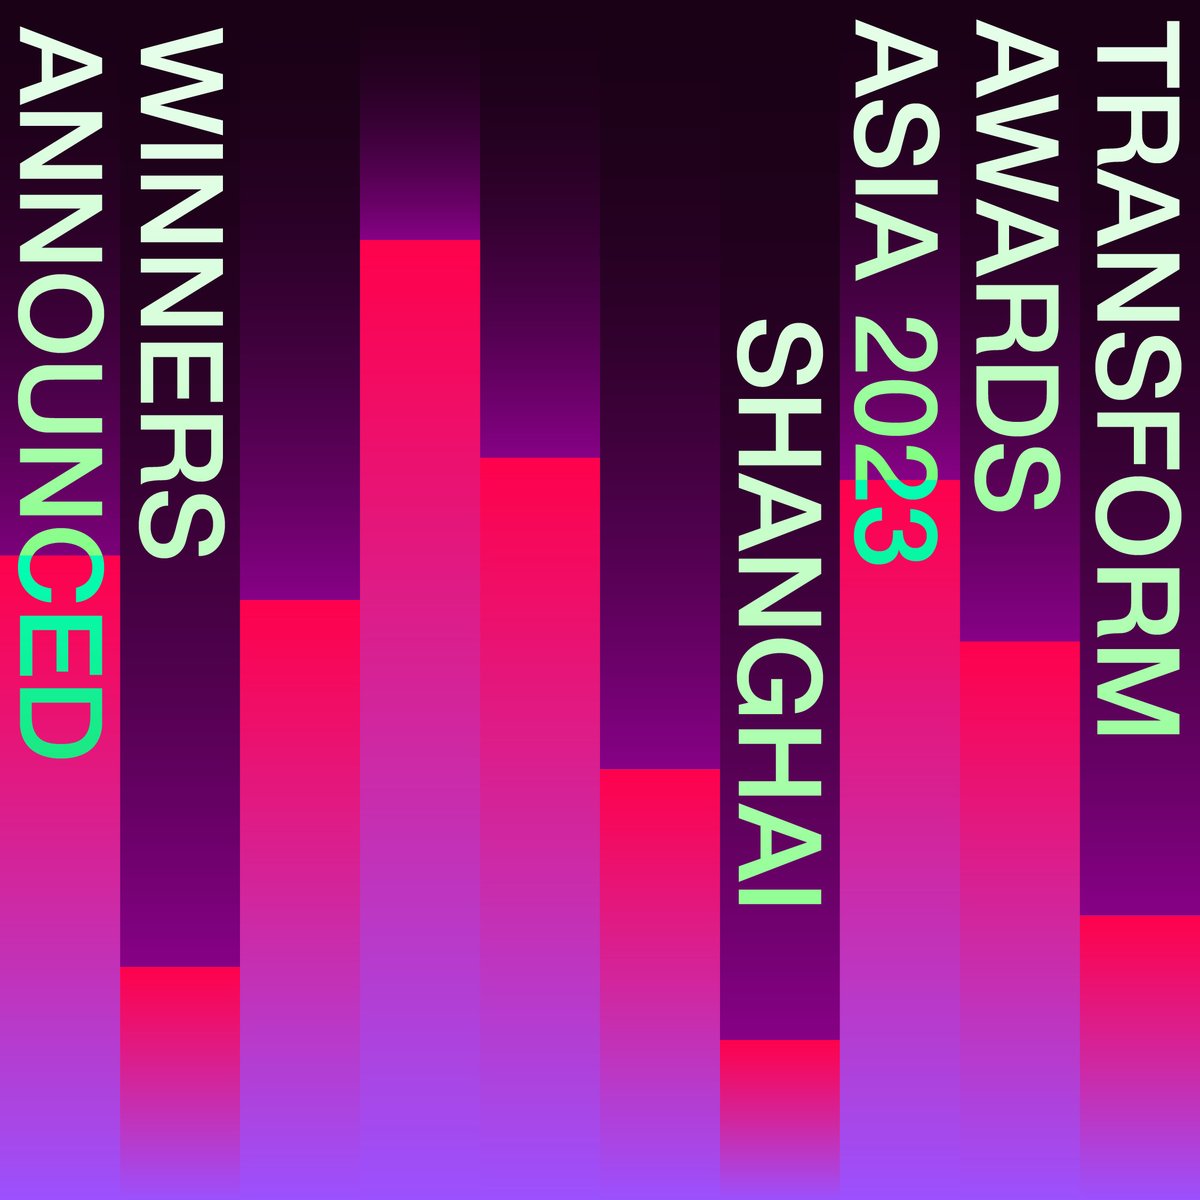 🏆 The winners are announced! 🏆 We were pleased to announce the winners for Transform Awards Asia 2023 in Shanghai last night! A huge congratulations to all the amazing winners. View the winners here 👉 bit.ly/3sHWHVA Read the news story 👉 bit.ly/49MhlEB